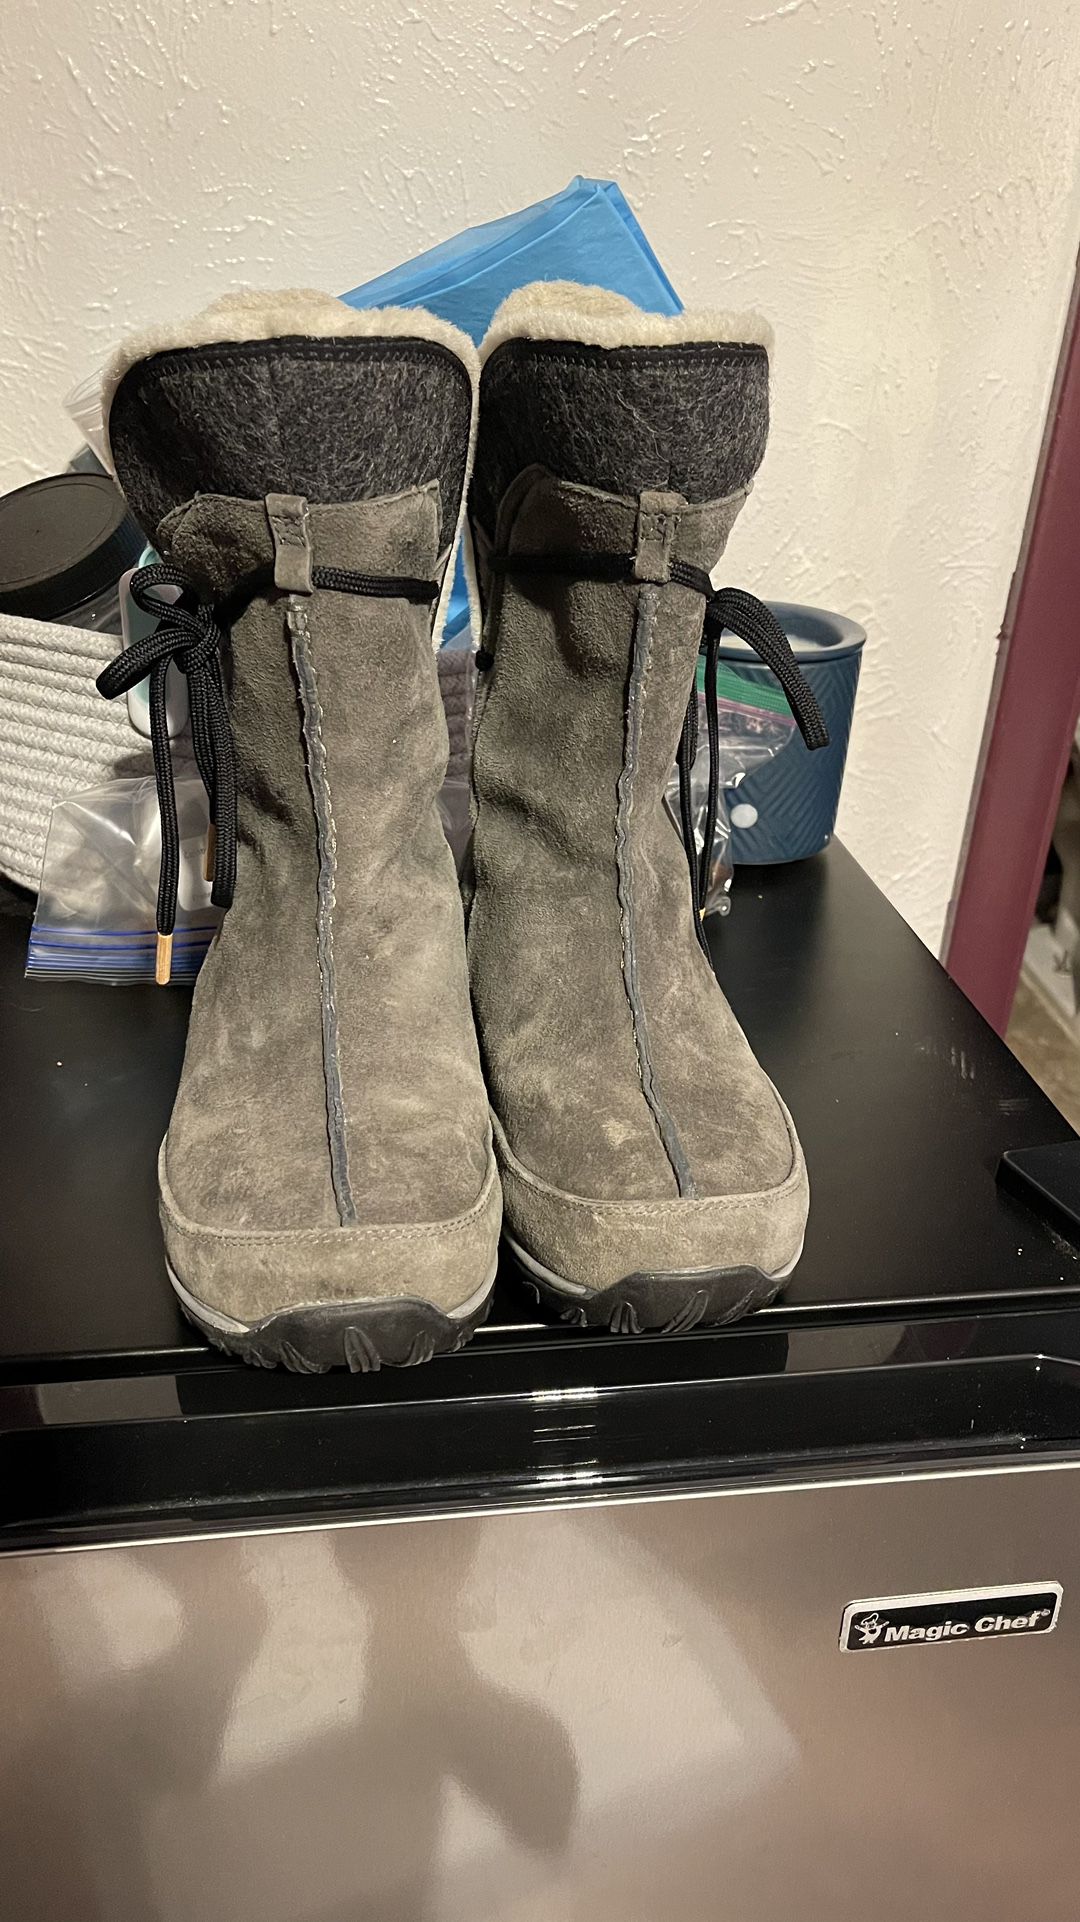 Patagonia Performance Footwear Women for Sale in Fort Worth, TX - OfferUp